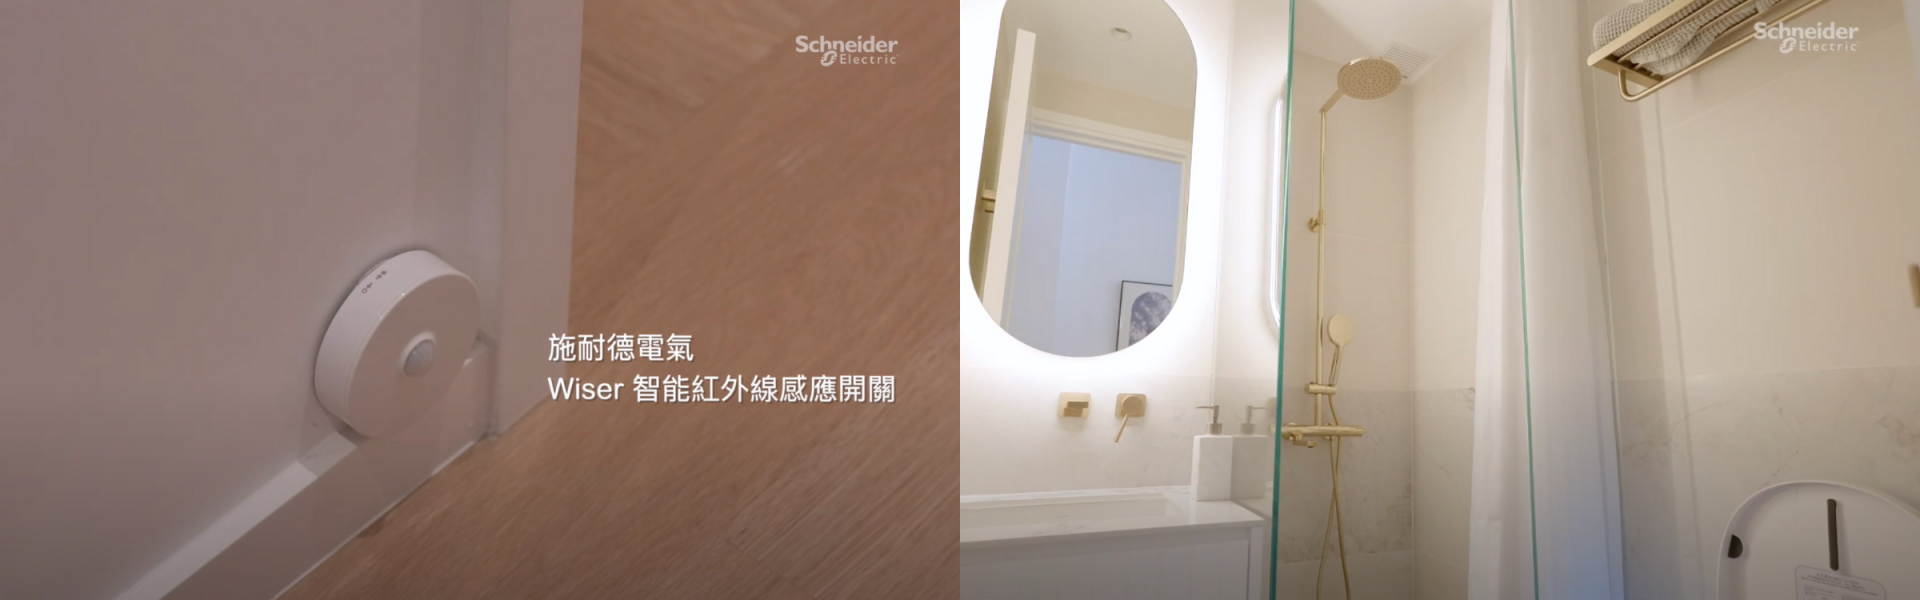 Schneider Electric's Wiser Smart Home Solution is Your Family's Thoughtful Smart Butler